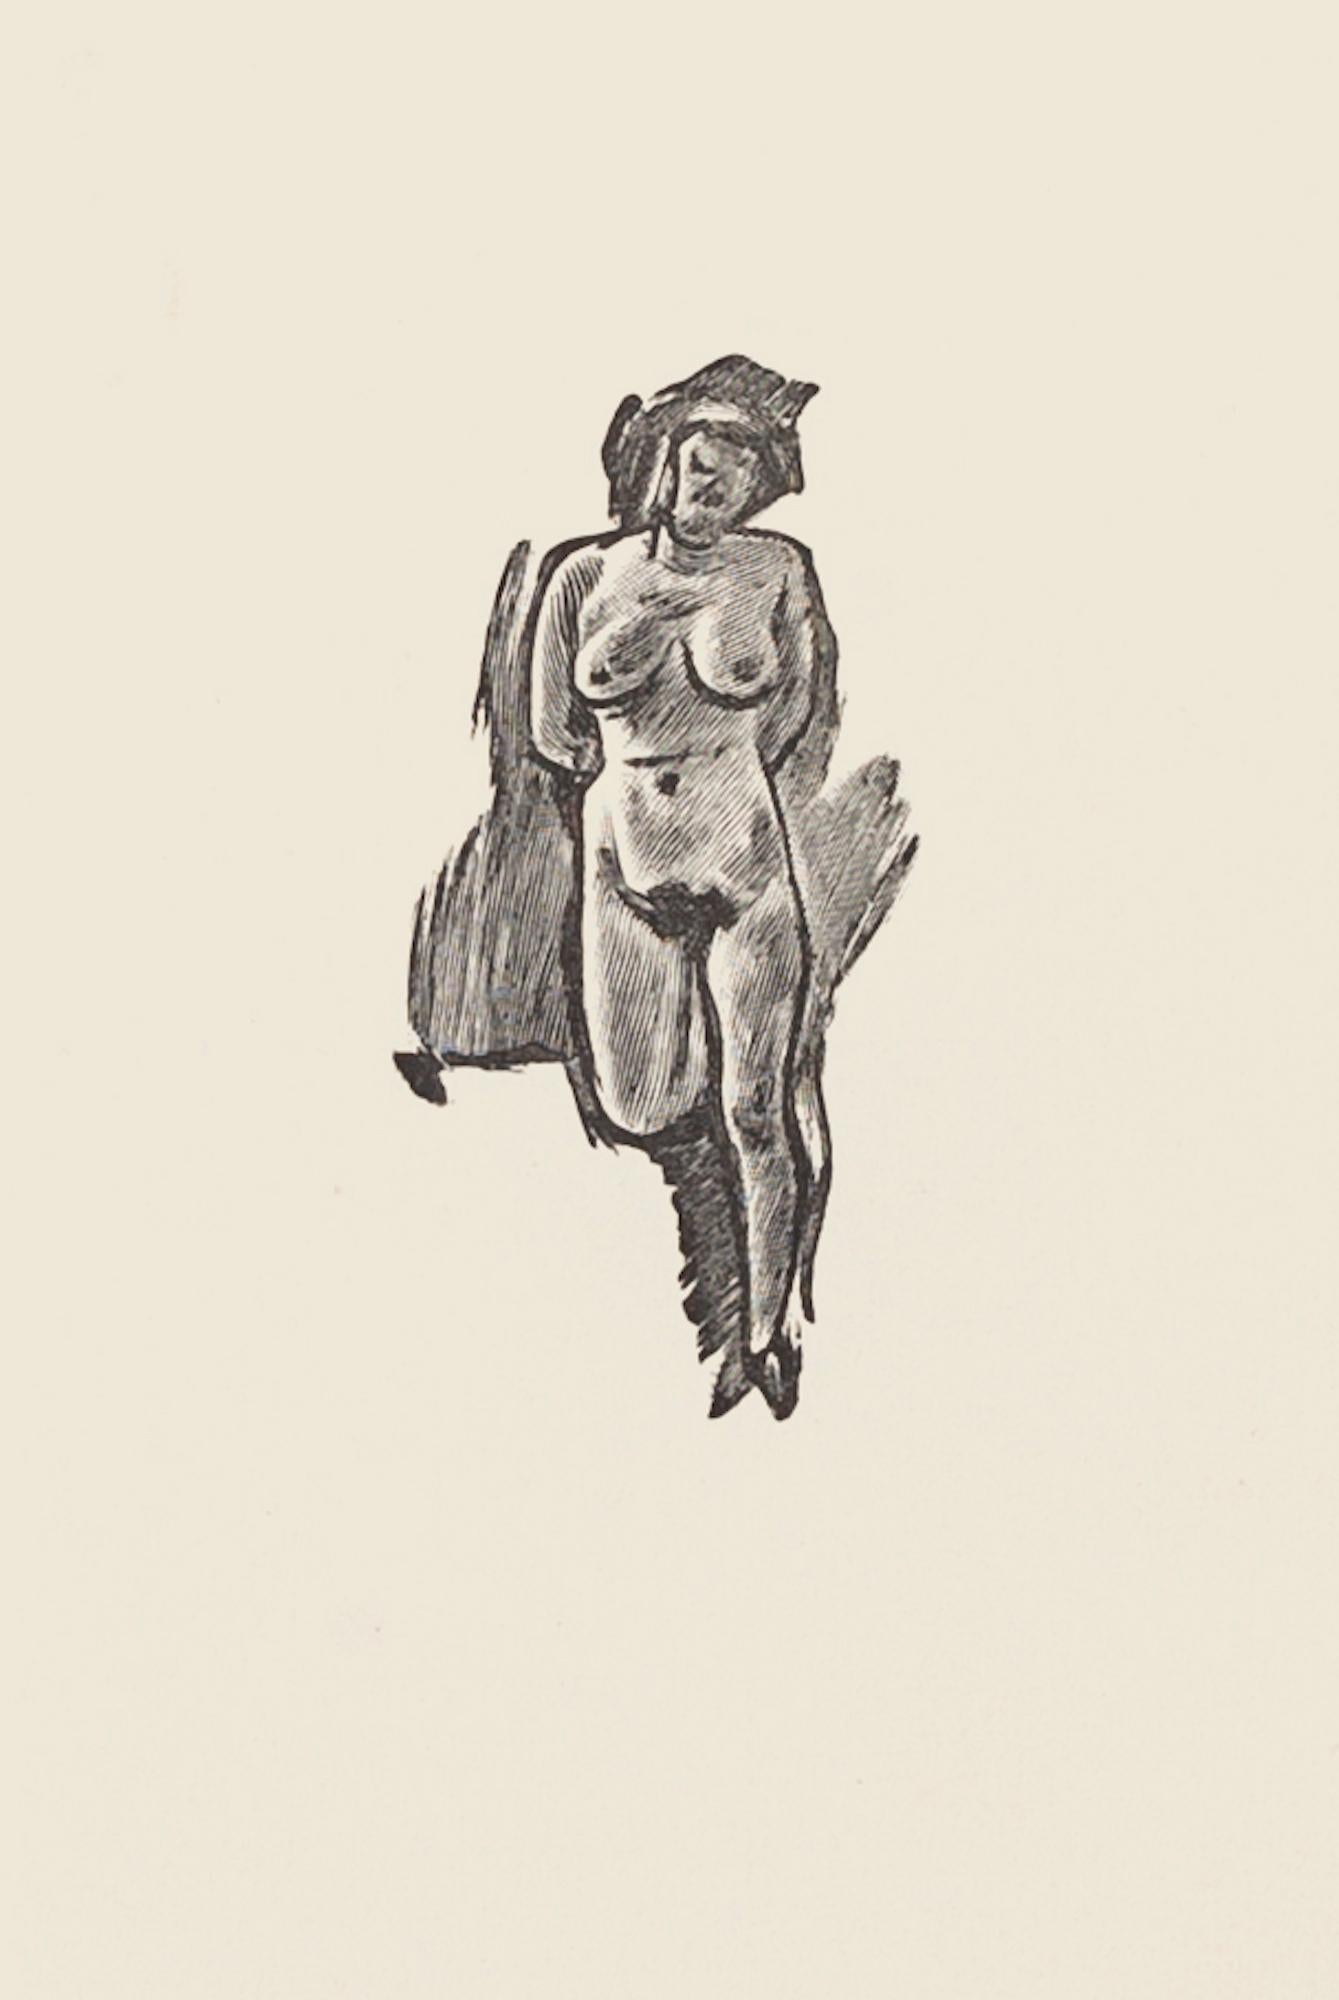 Nude is an original zincography artwork realized by Mino Maccari.

Included a white Passepartout: 49 x 34

The state of preservation is very good.




The artwork represents a nude standing woman, characterized by strong and confident strokes.

Mino